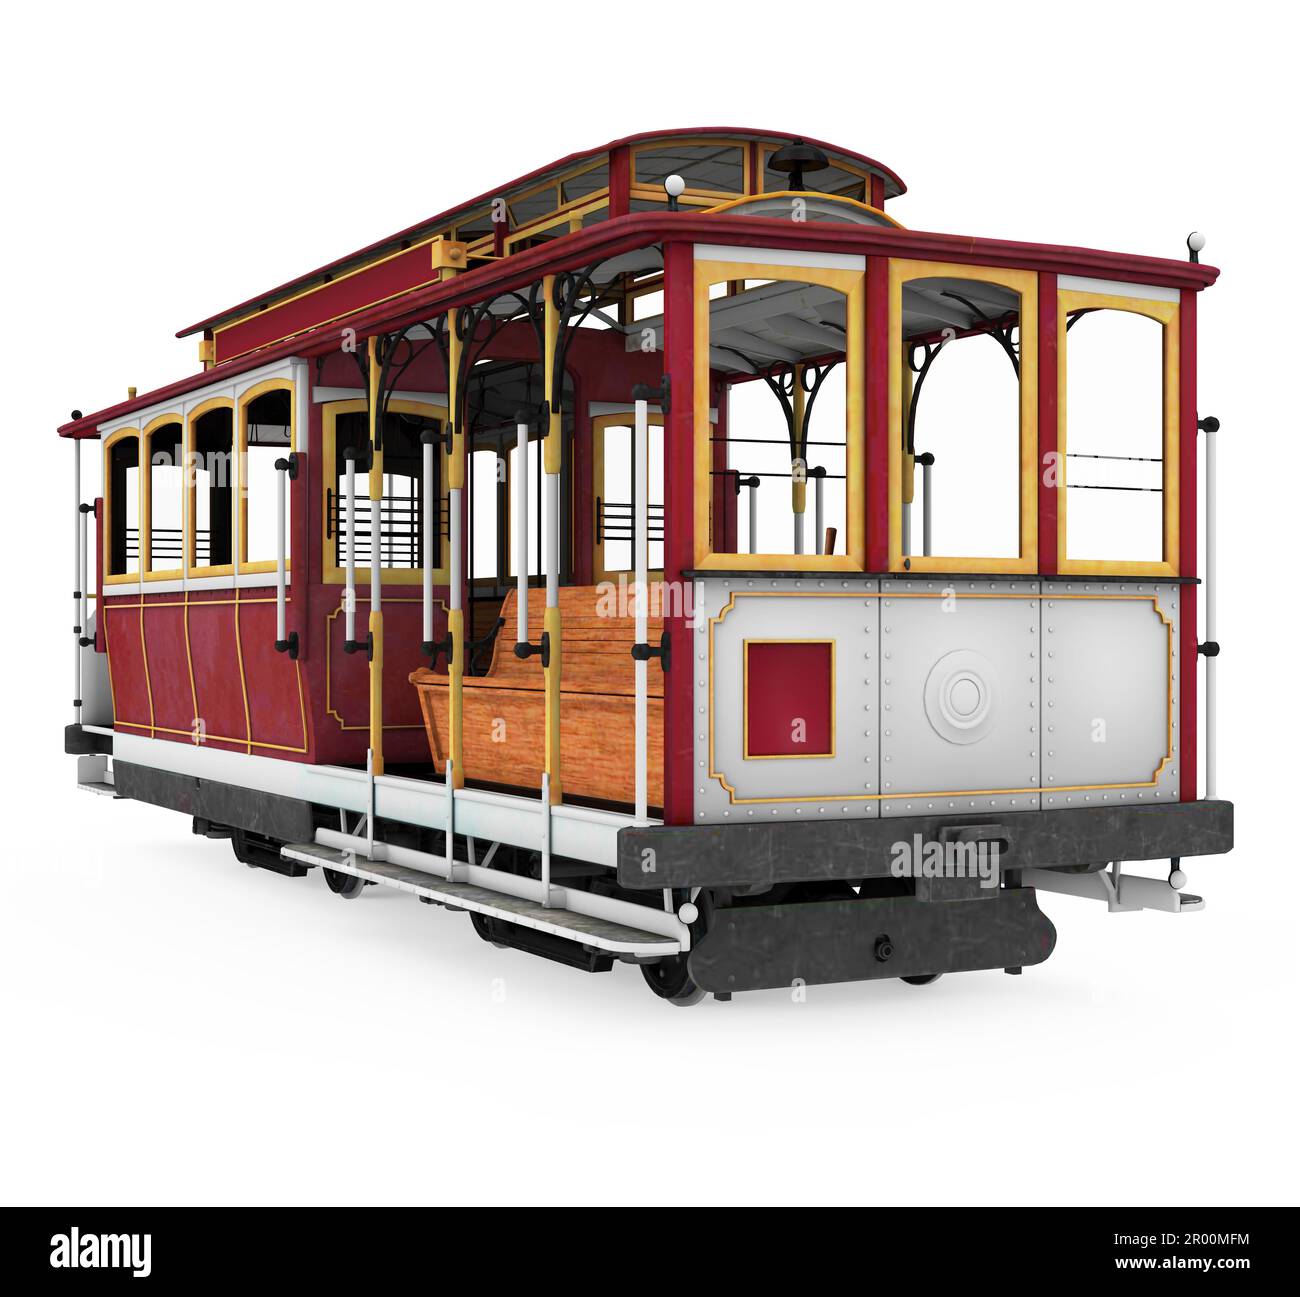 Moving Wheels Of Retro Tram Stock Photo - Download Image Now